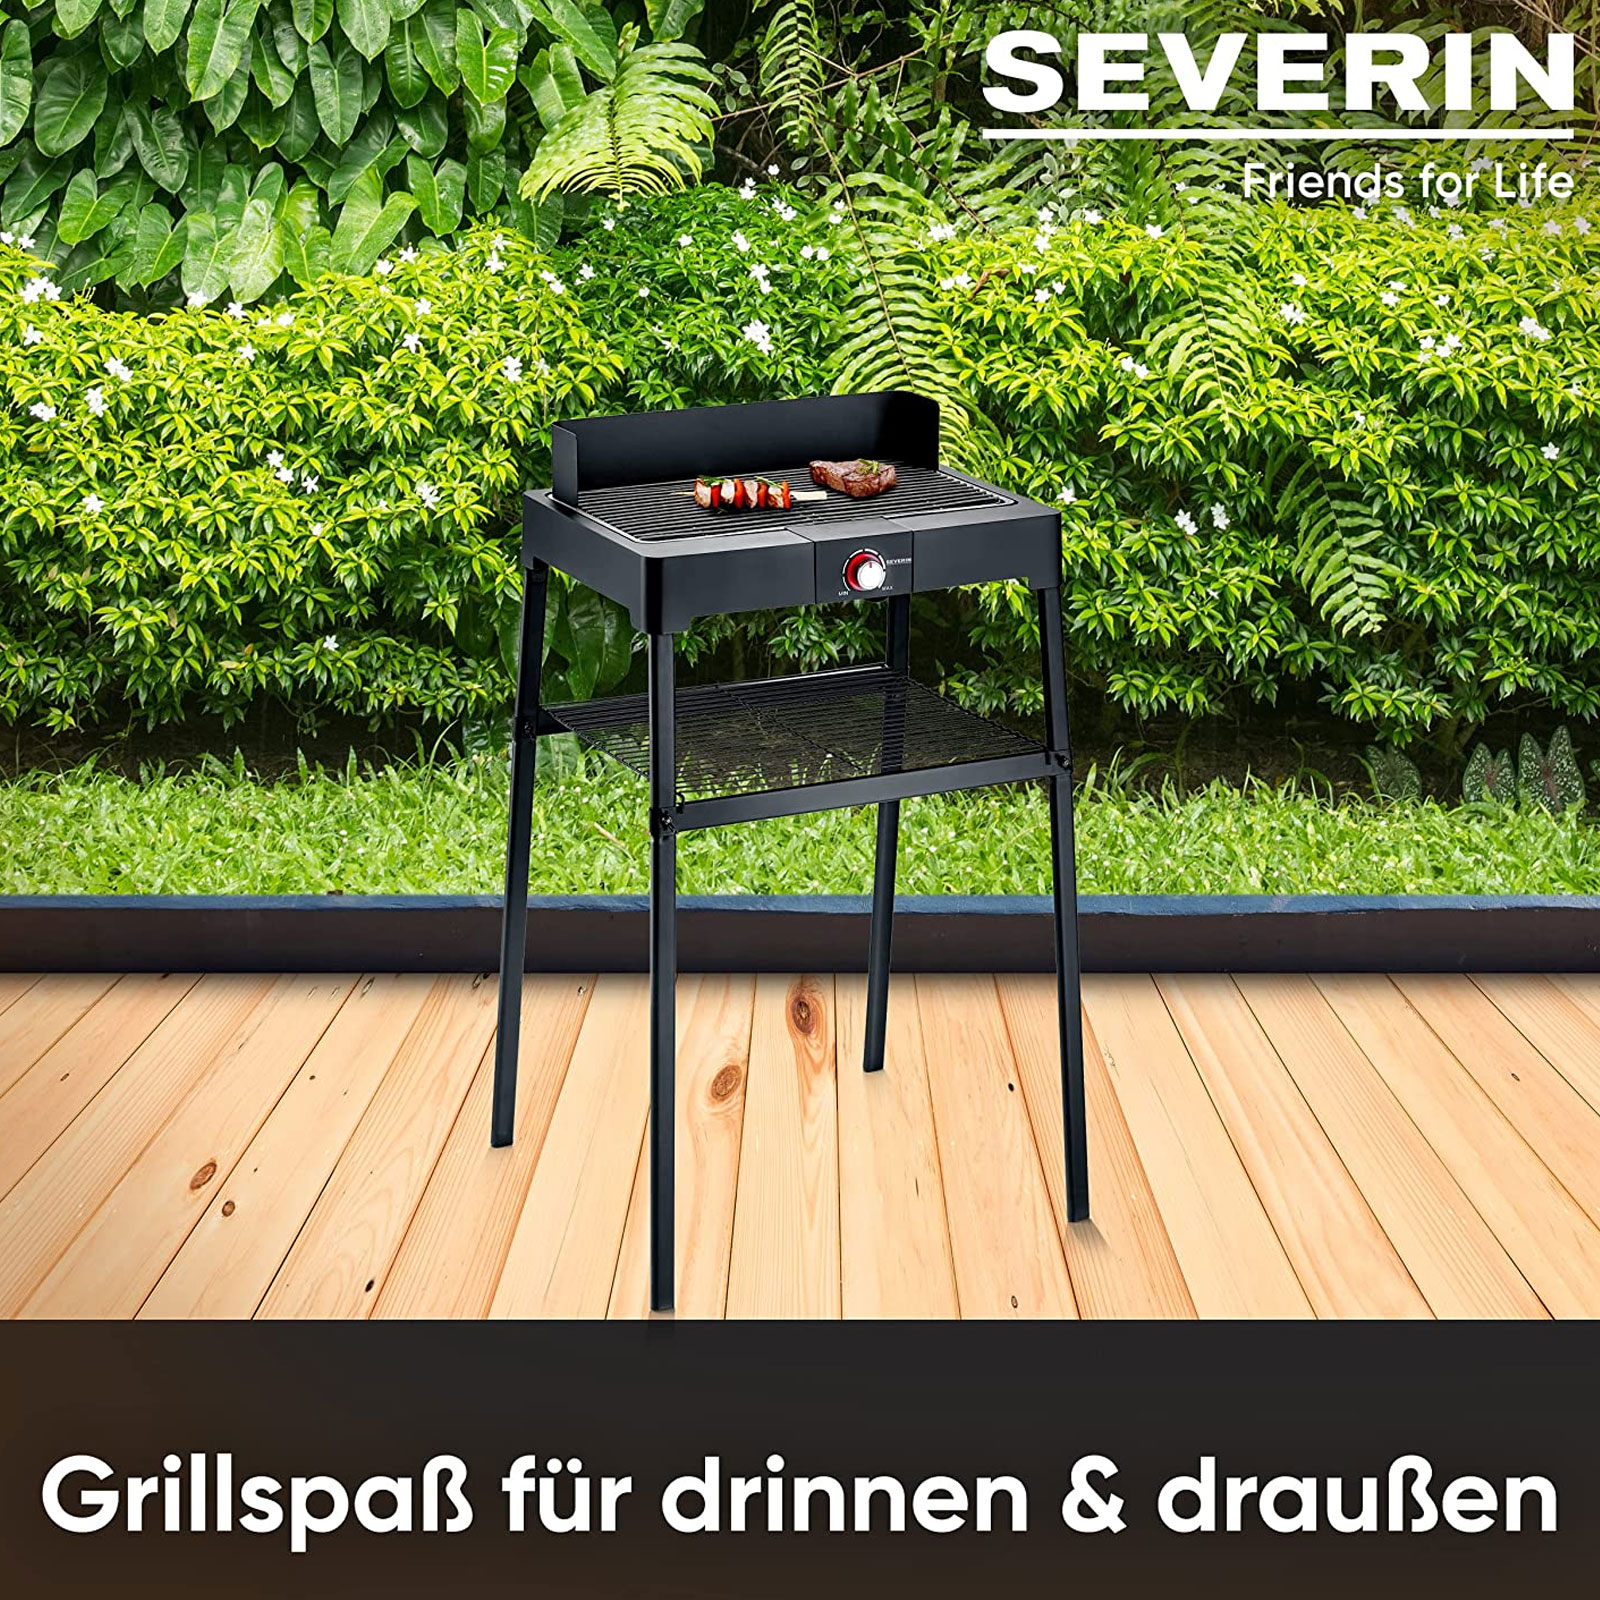 Severin PG 8566 Standgrill